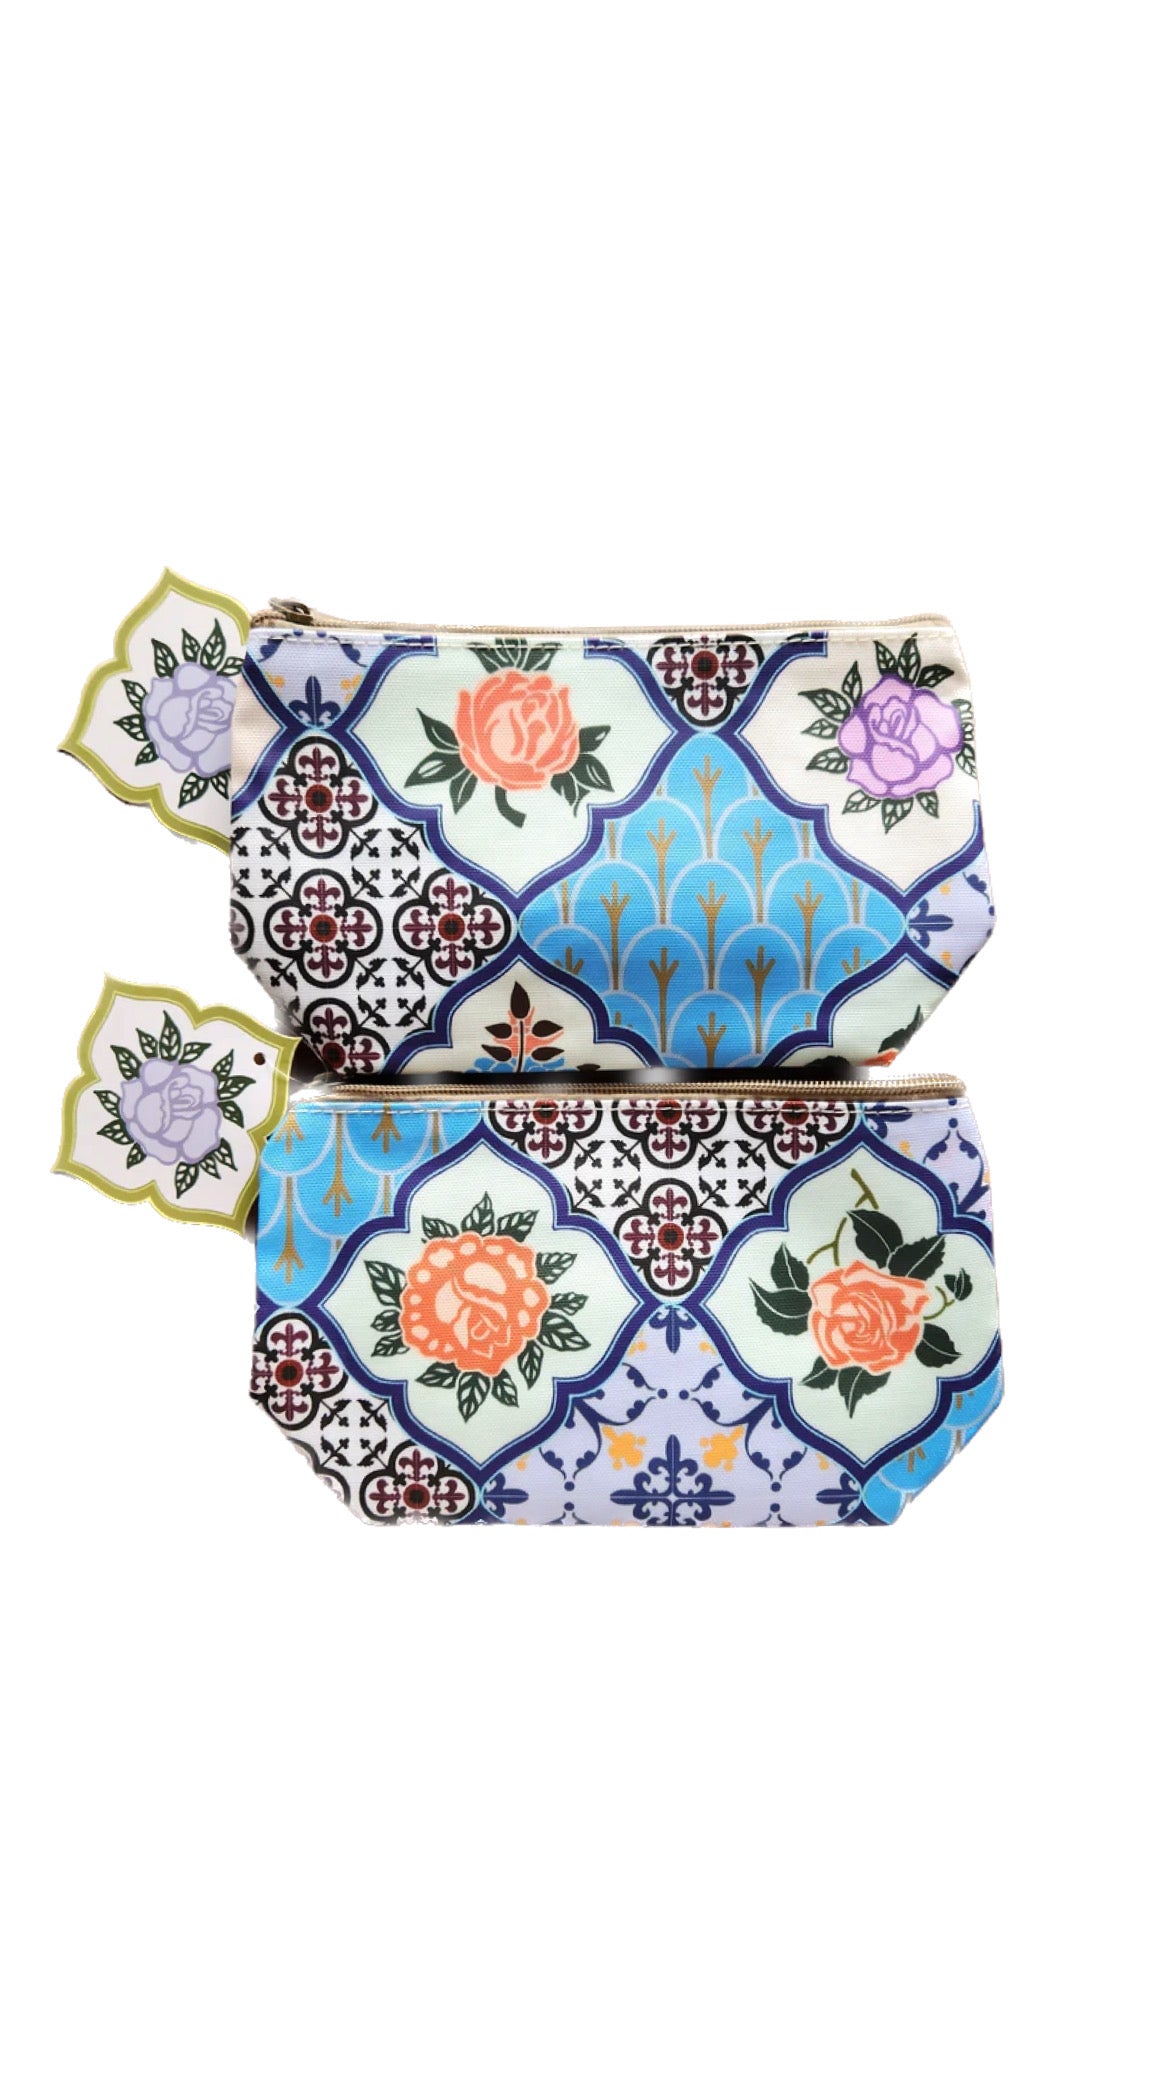 Peranakan Rose Tile Make Up Pouch